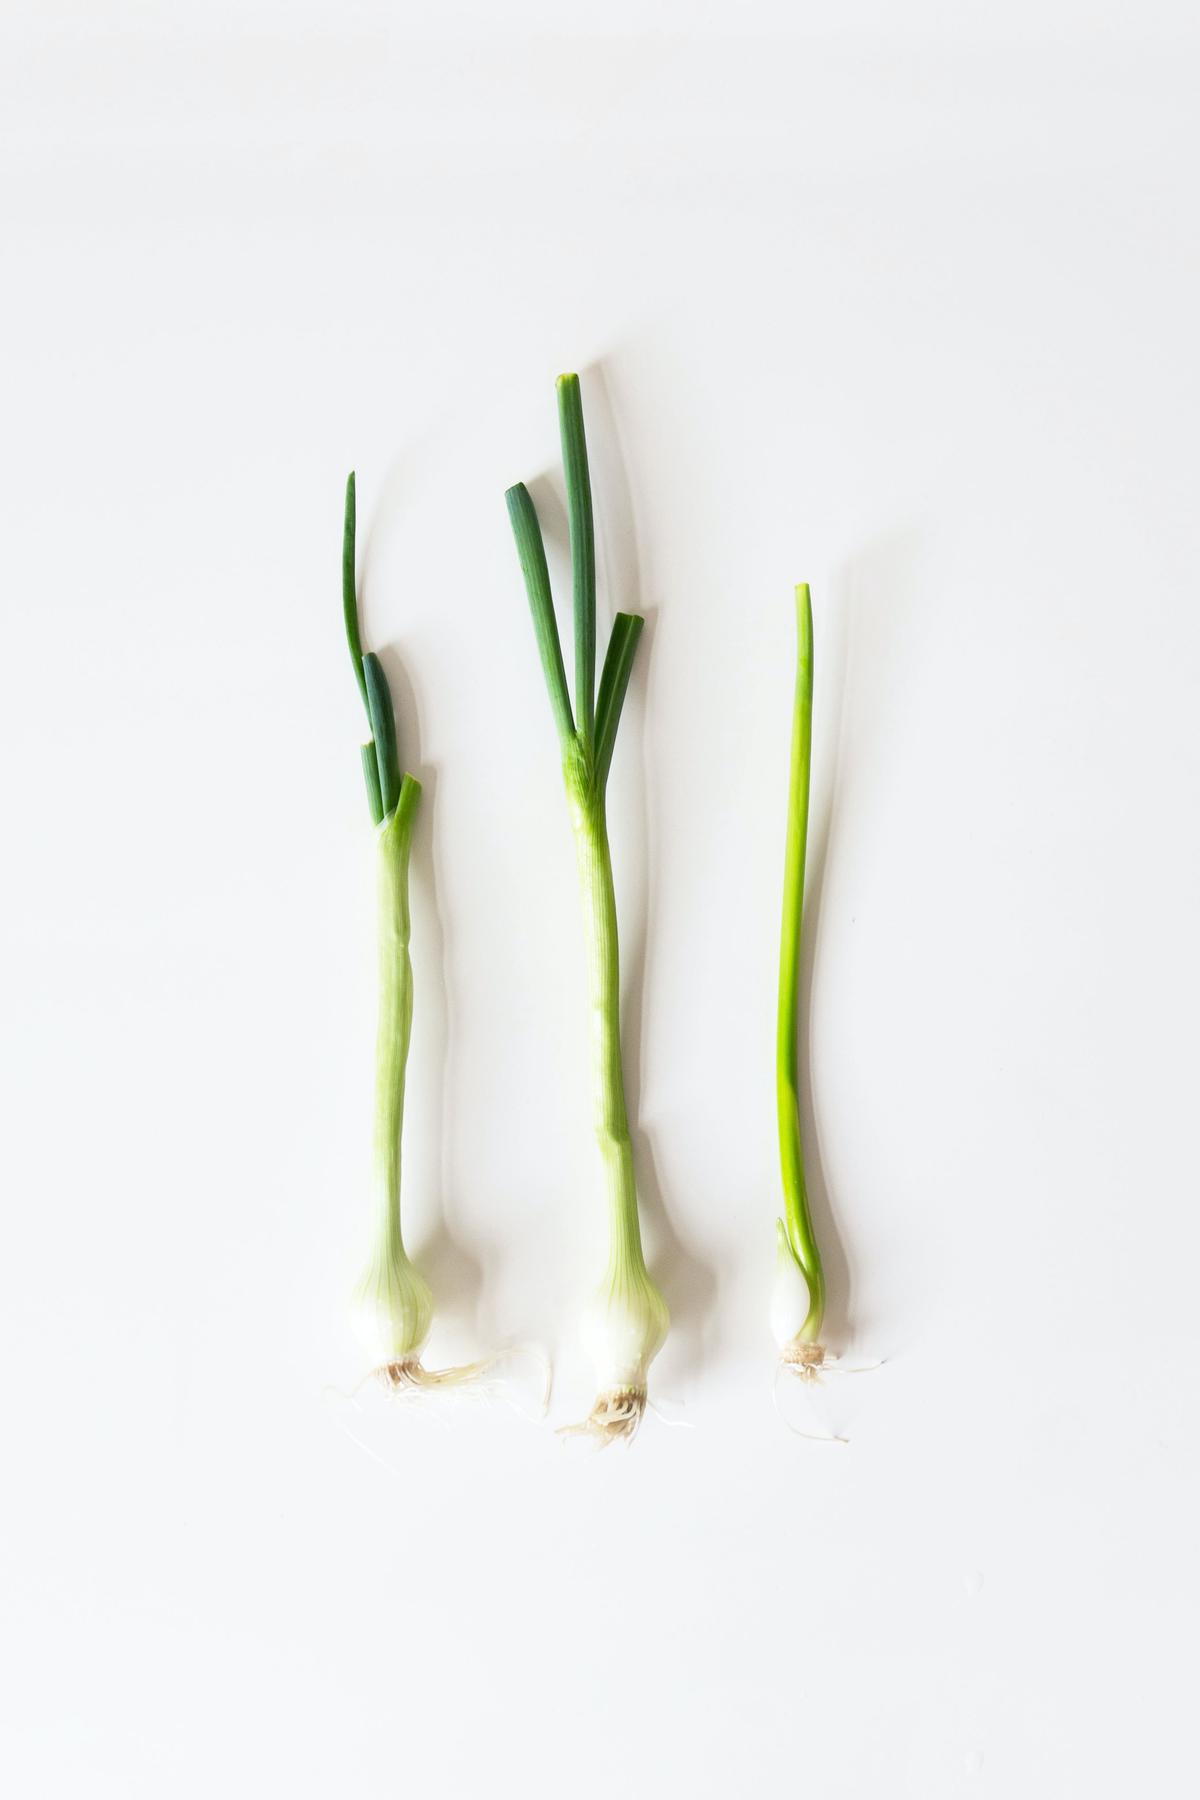 Illustration of common problems in indoor green onion gardening, including pests and diseases.